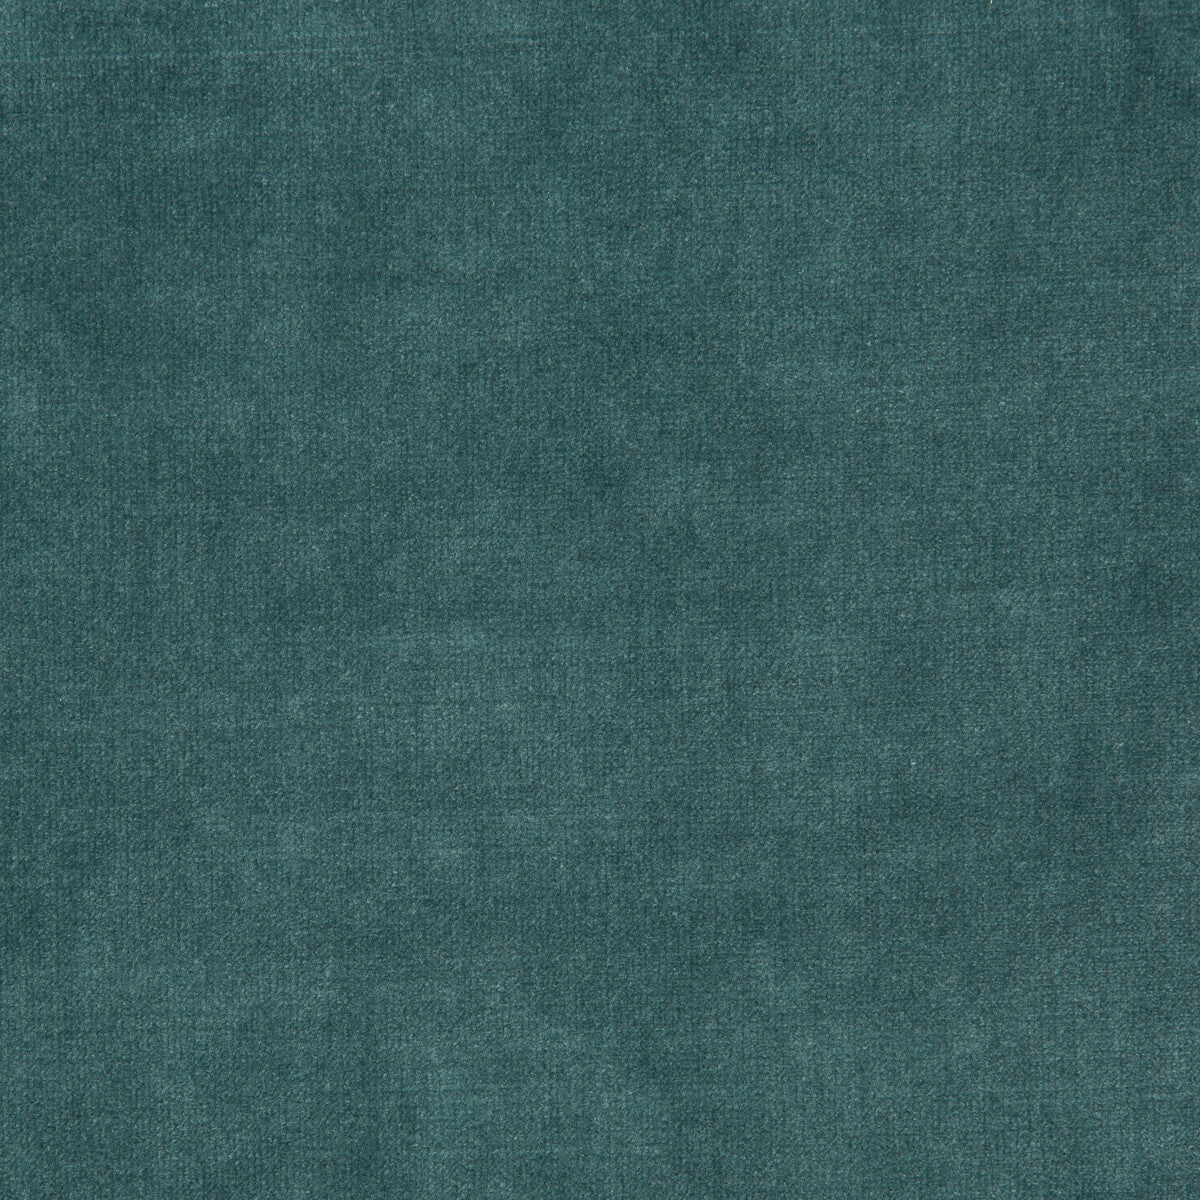 Chessford fabric in teal color - pattern 35360.15.0 - by Kravet Smart in the Performance collection